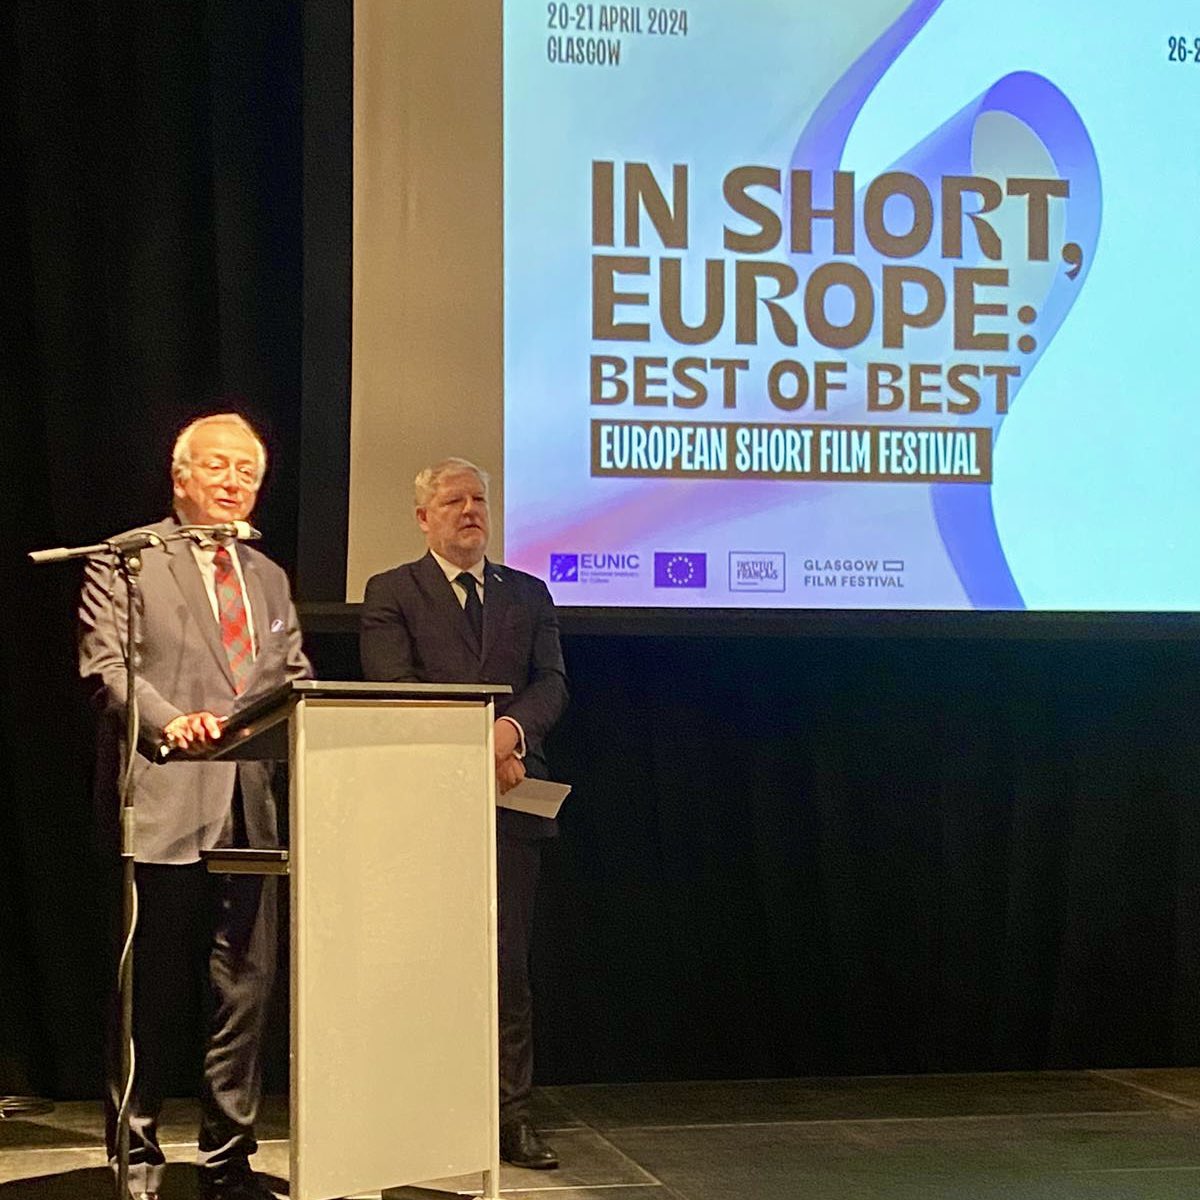 I was very glad to formally launch #EuropemonthUK2024 in #Glasgow at the presence of Scottish Cabinet Secretary @angusrobertson. The @EUNICLONDON @glasgowfilmfest #InshortEurope film festival is the first act of a month long celebration of events.